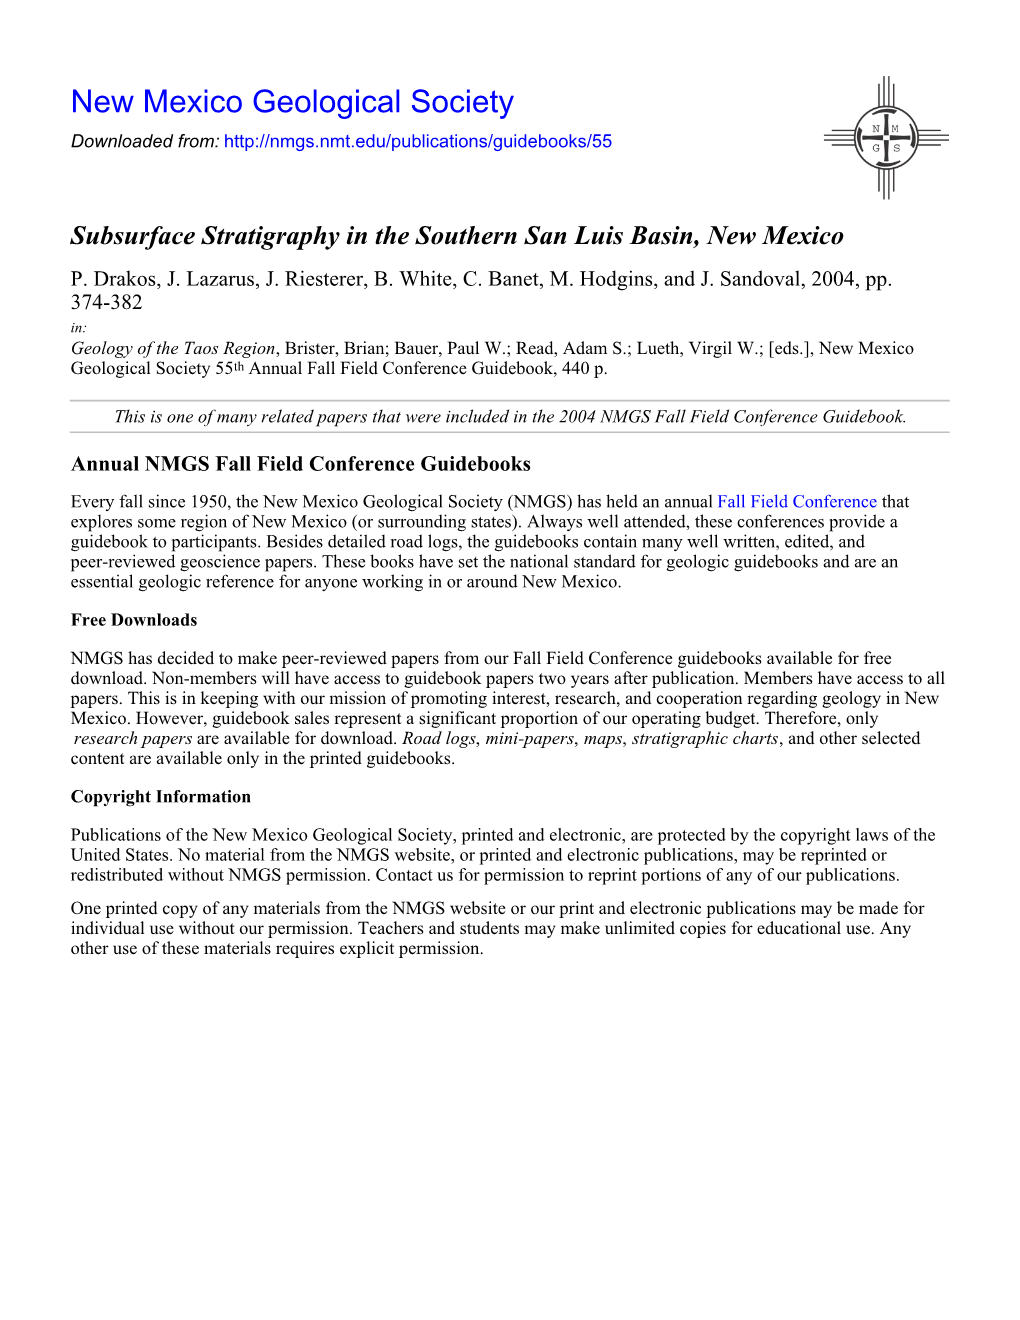 Subsurface Stratigraphy in the Southern San Luis Basin, New Mexico P